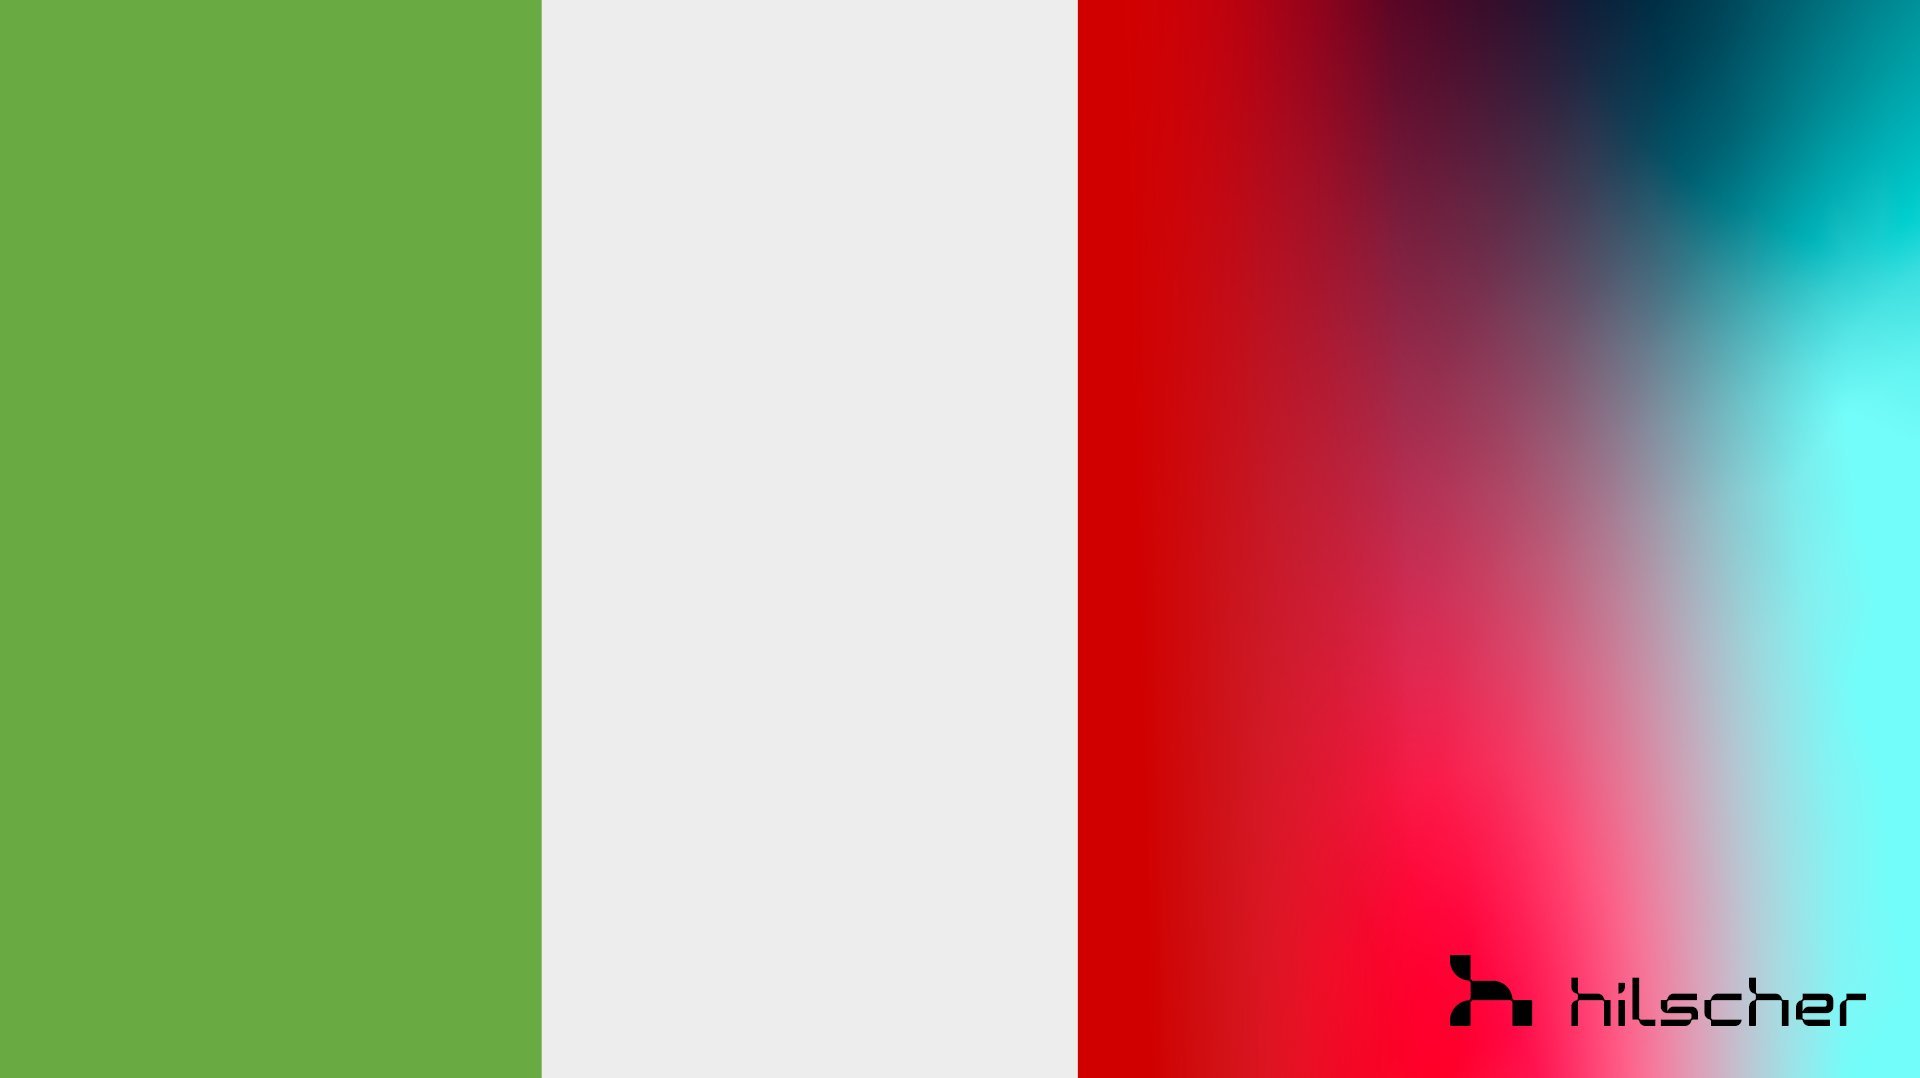 The flag of Italy. On the right side of the picture is a fade to a colorful space, accounting for nearly a quarter of the image.